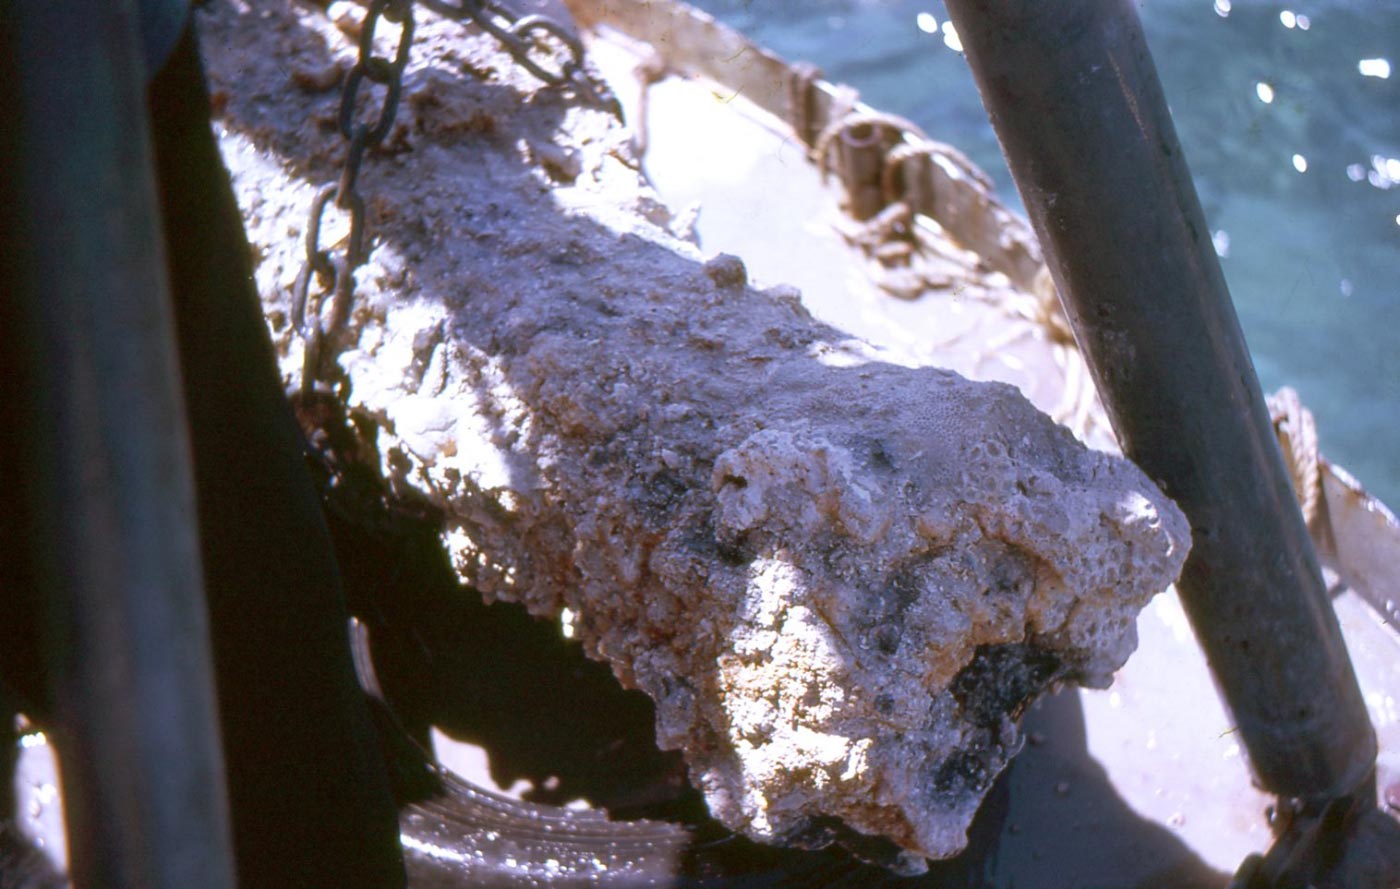 Colour photo showing end of a cannon barrel covered in coral and sediment. - click to view larger image